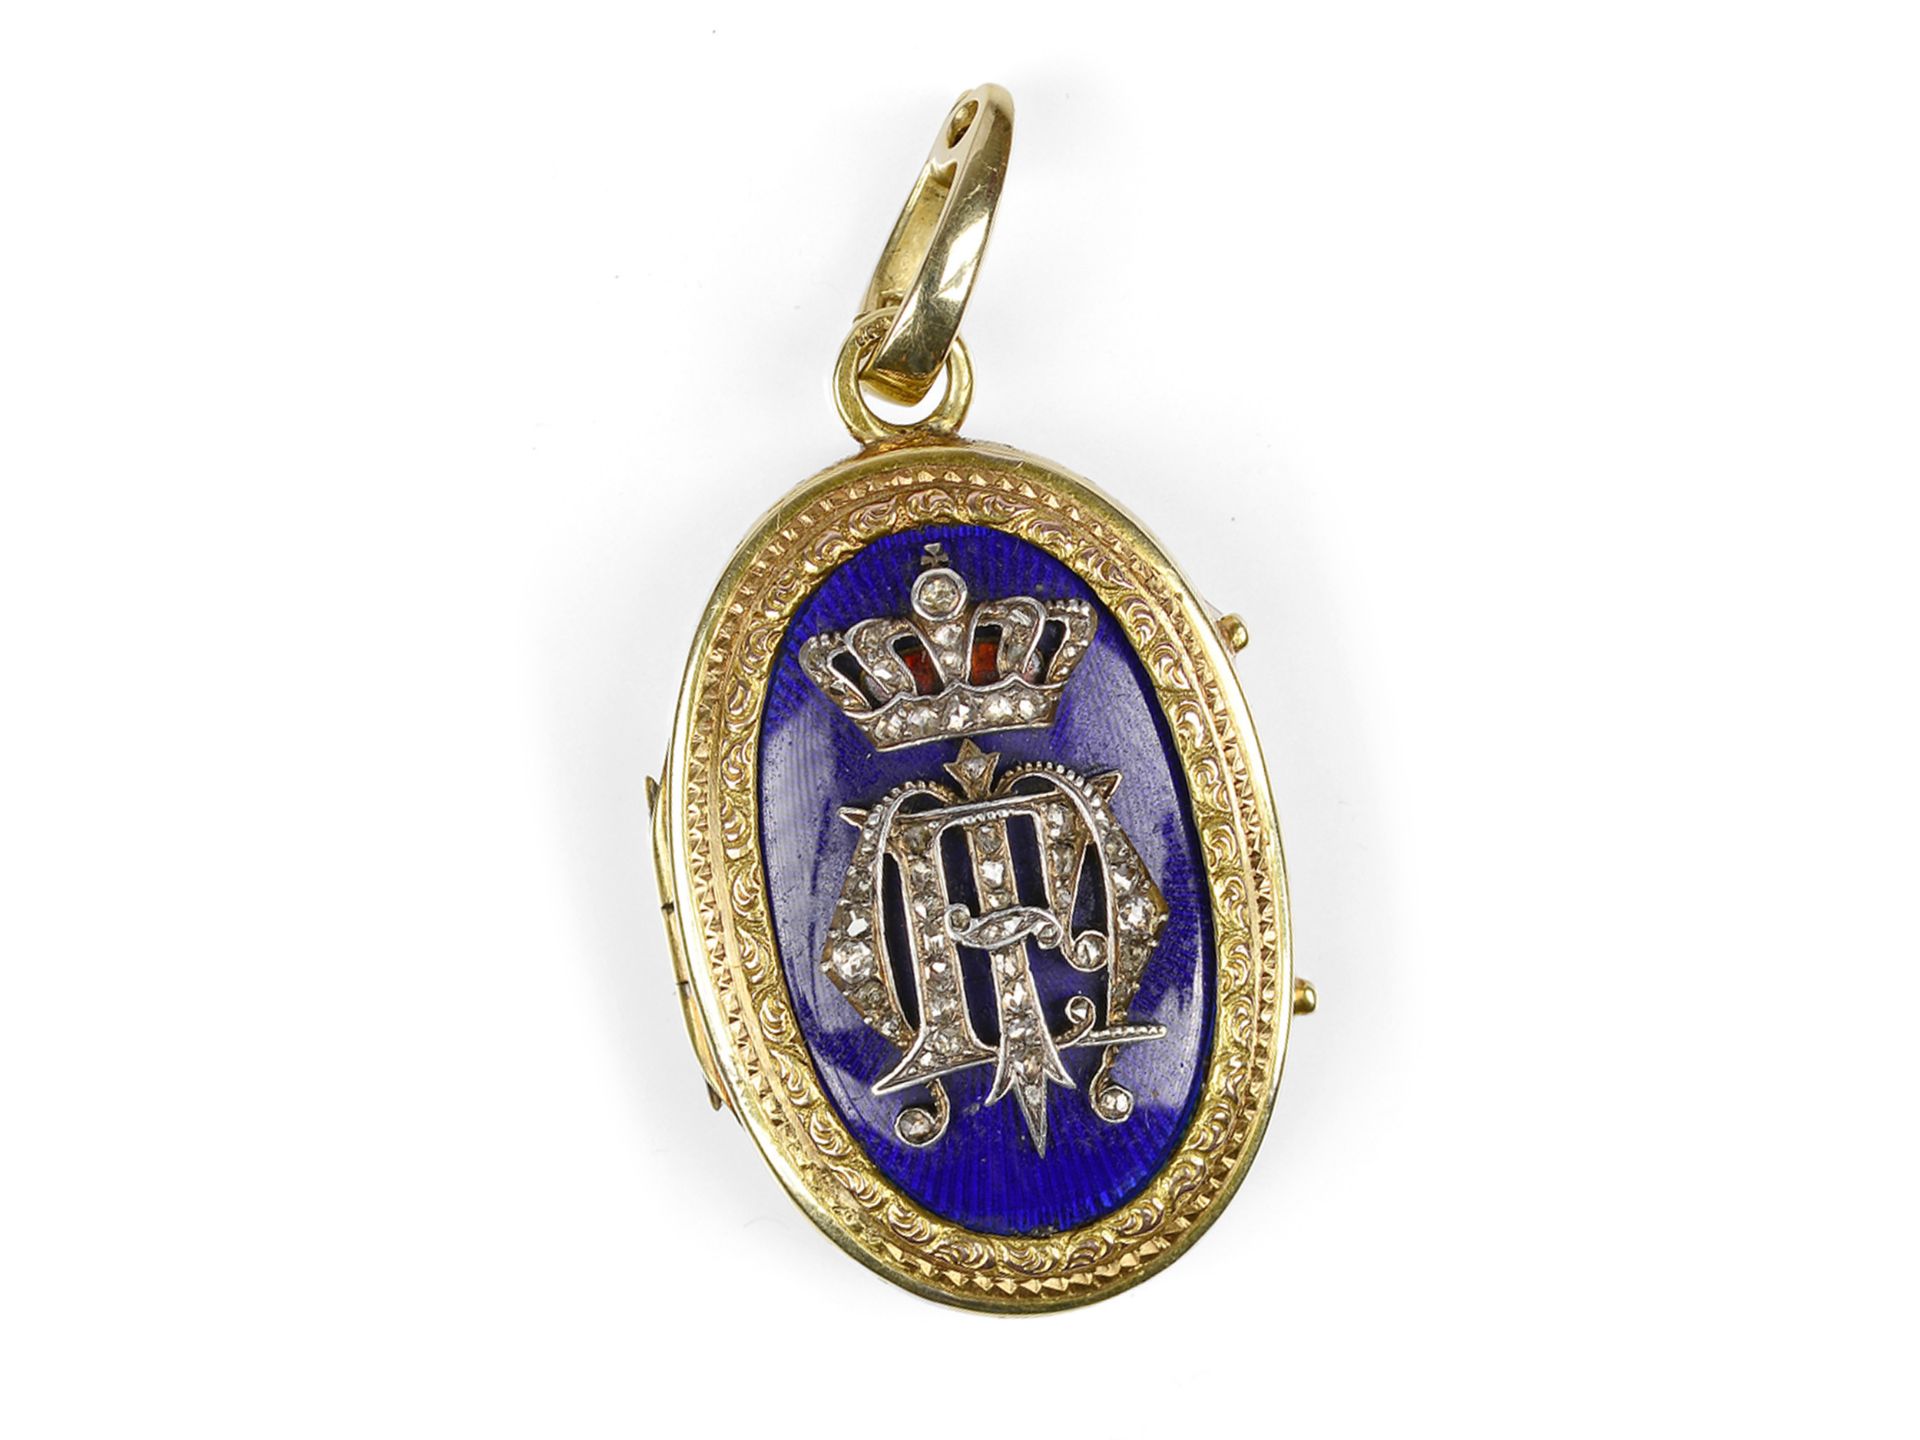 Archducal gift medallion